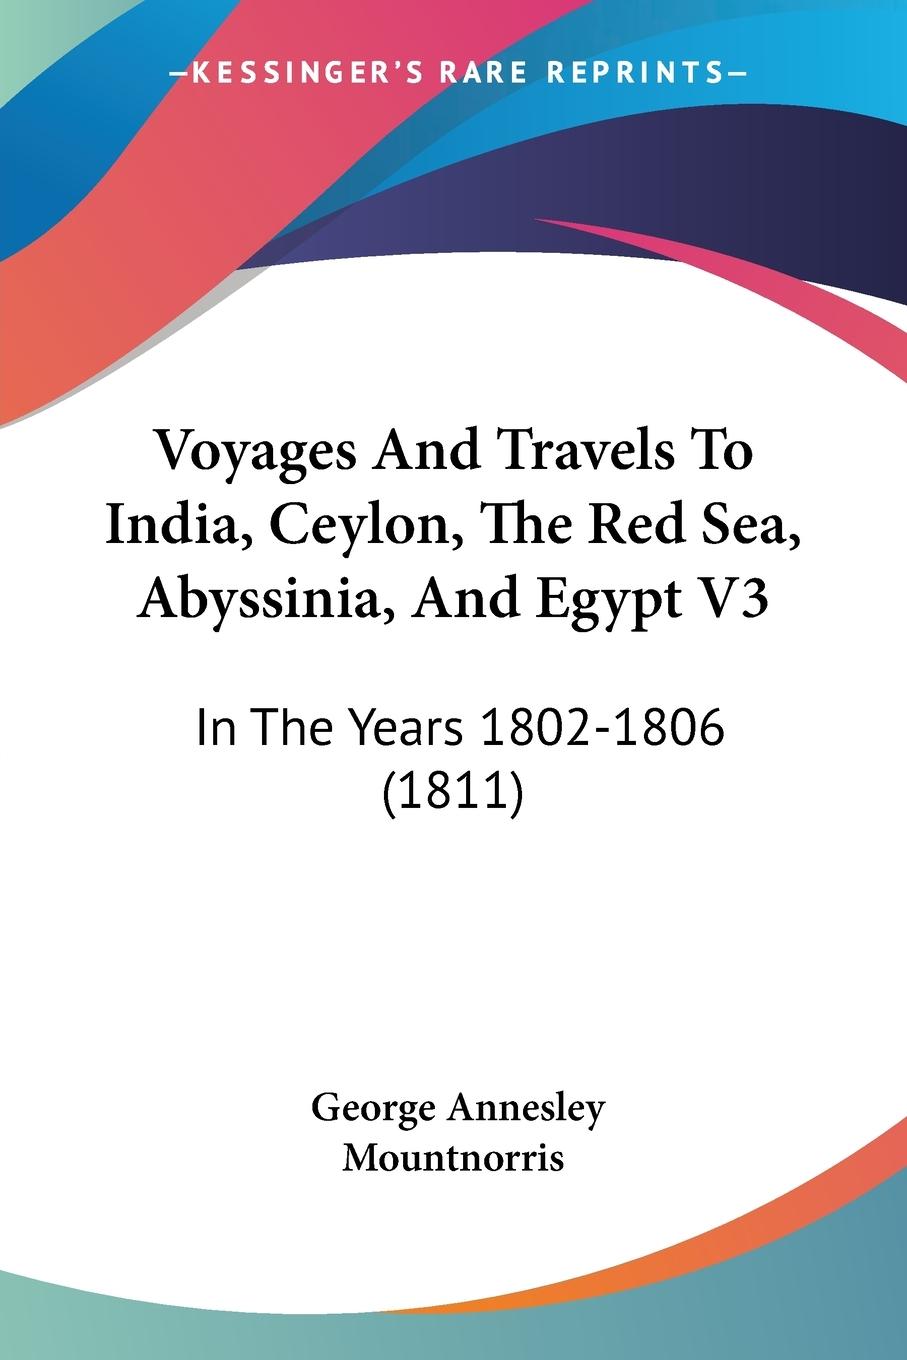 Voyages And Travels To India, Ceylon, The Red Sea, Abyssinia, And Egypt V3 - Mountnorris, George Annesley